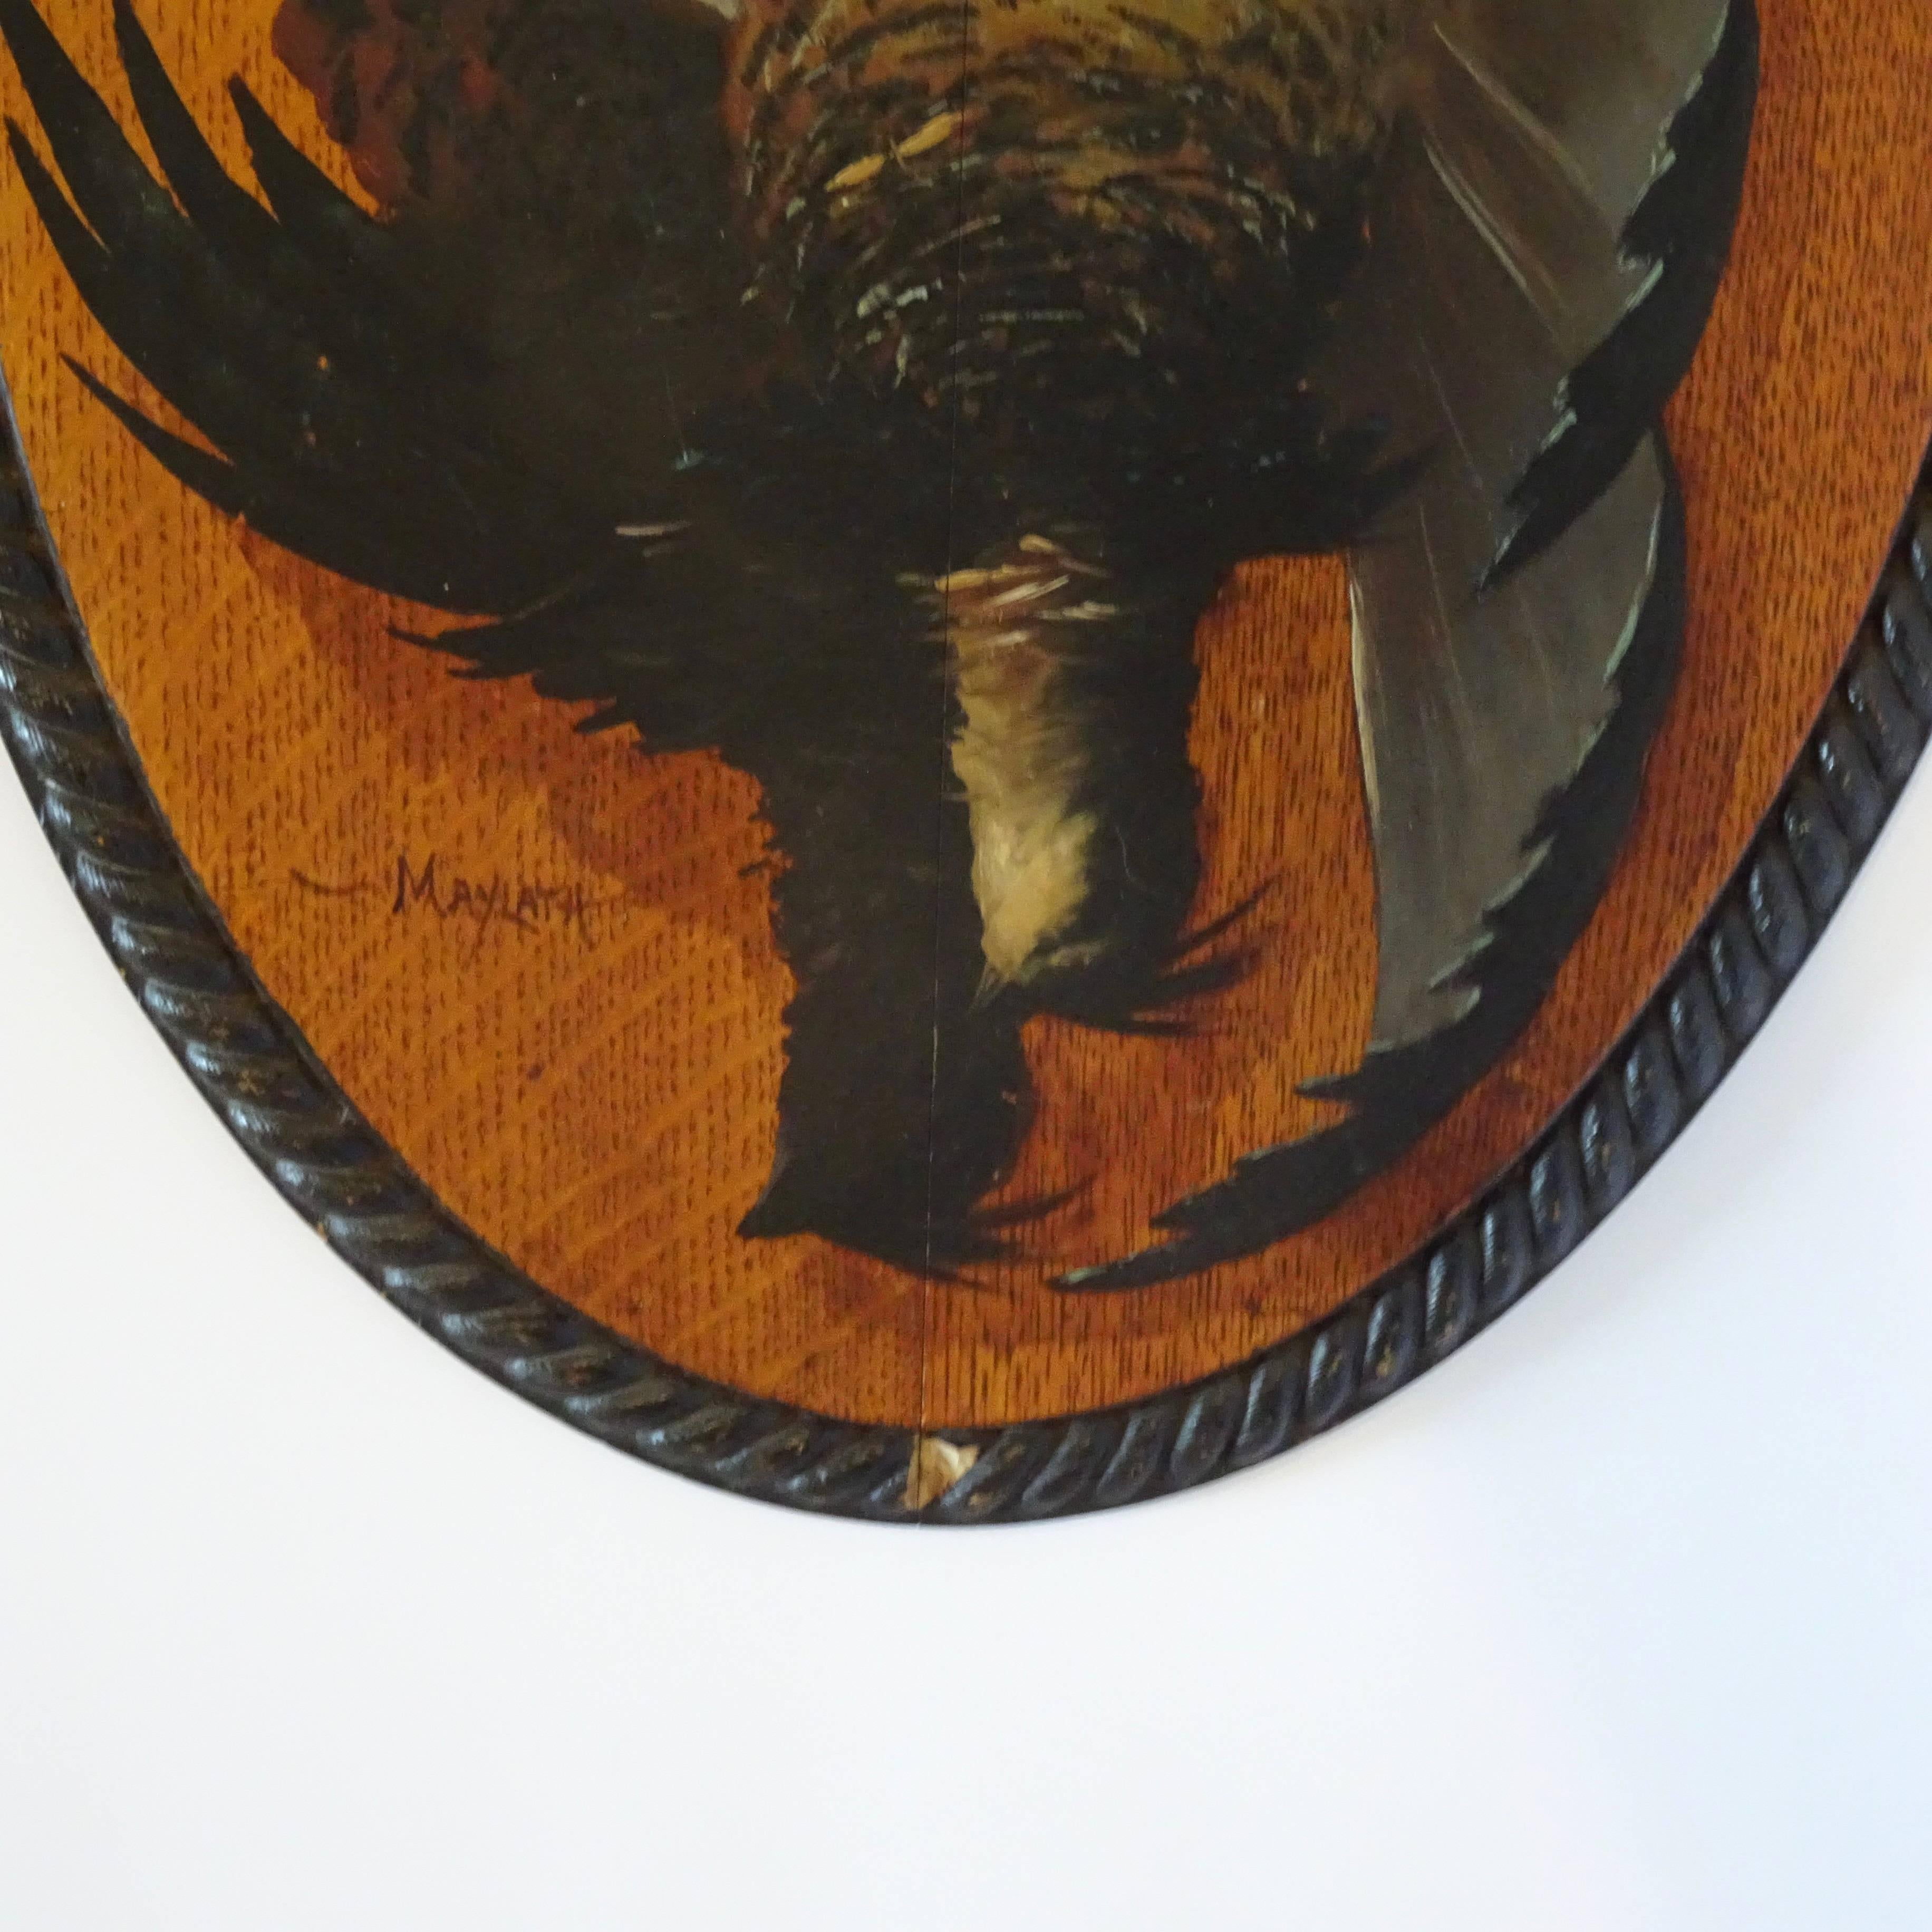 American  Painting of Hanging Game Bird on Oval Shaped Wood Plaque by Maylath